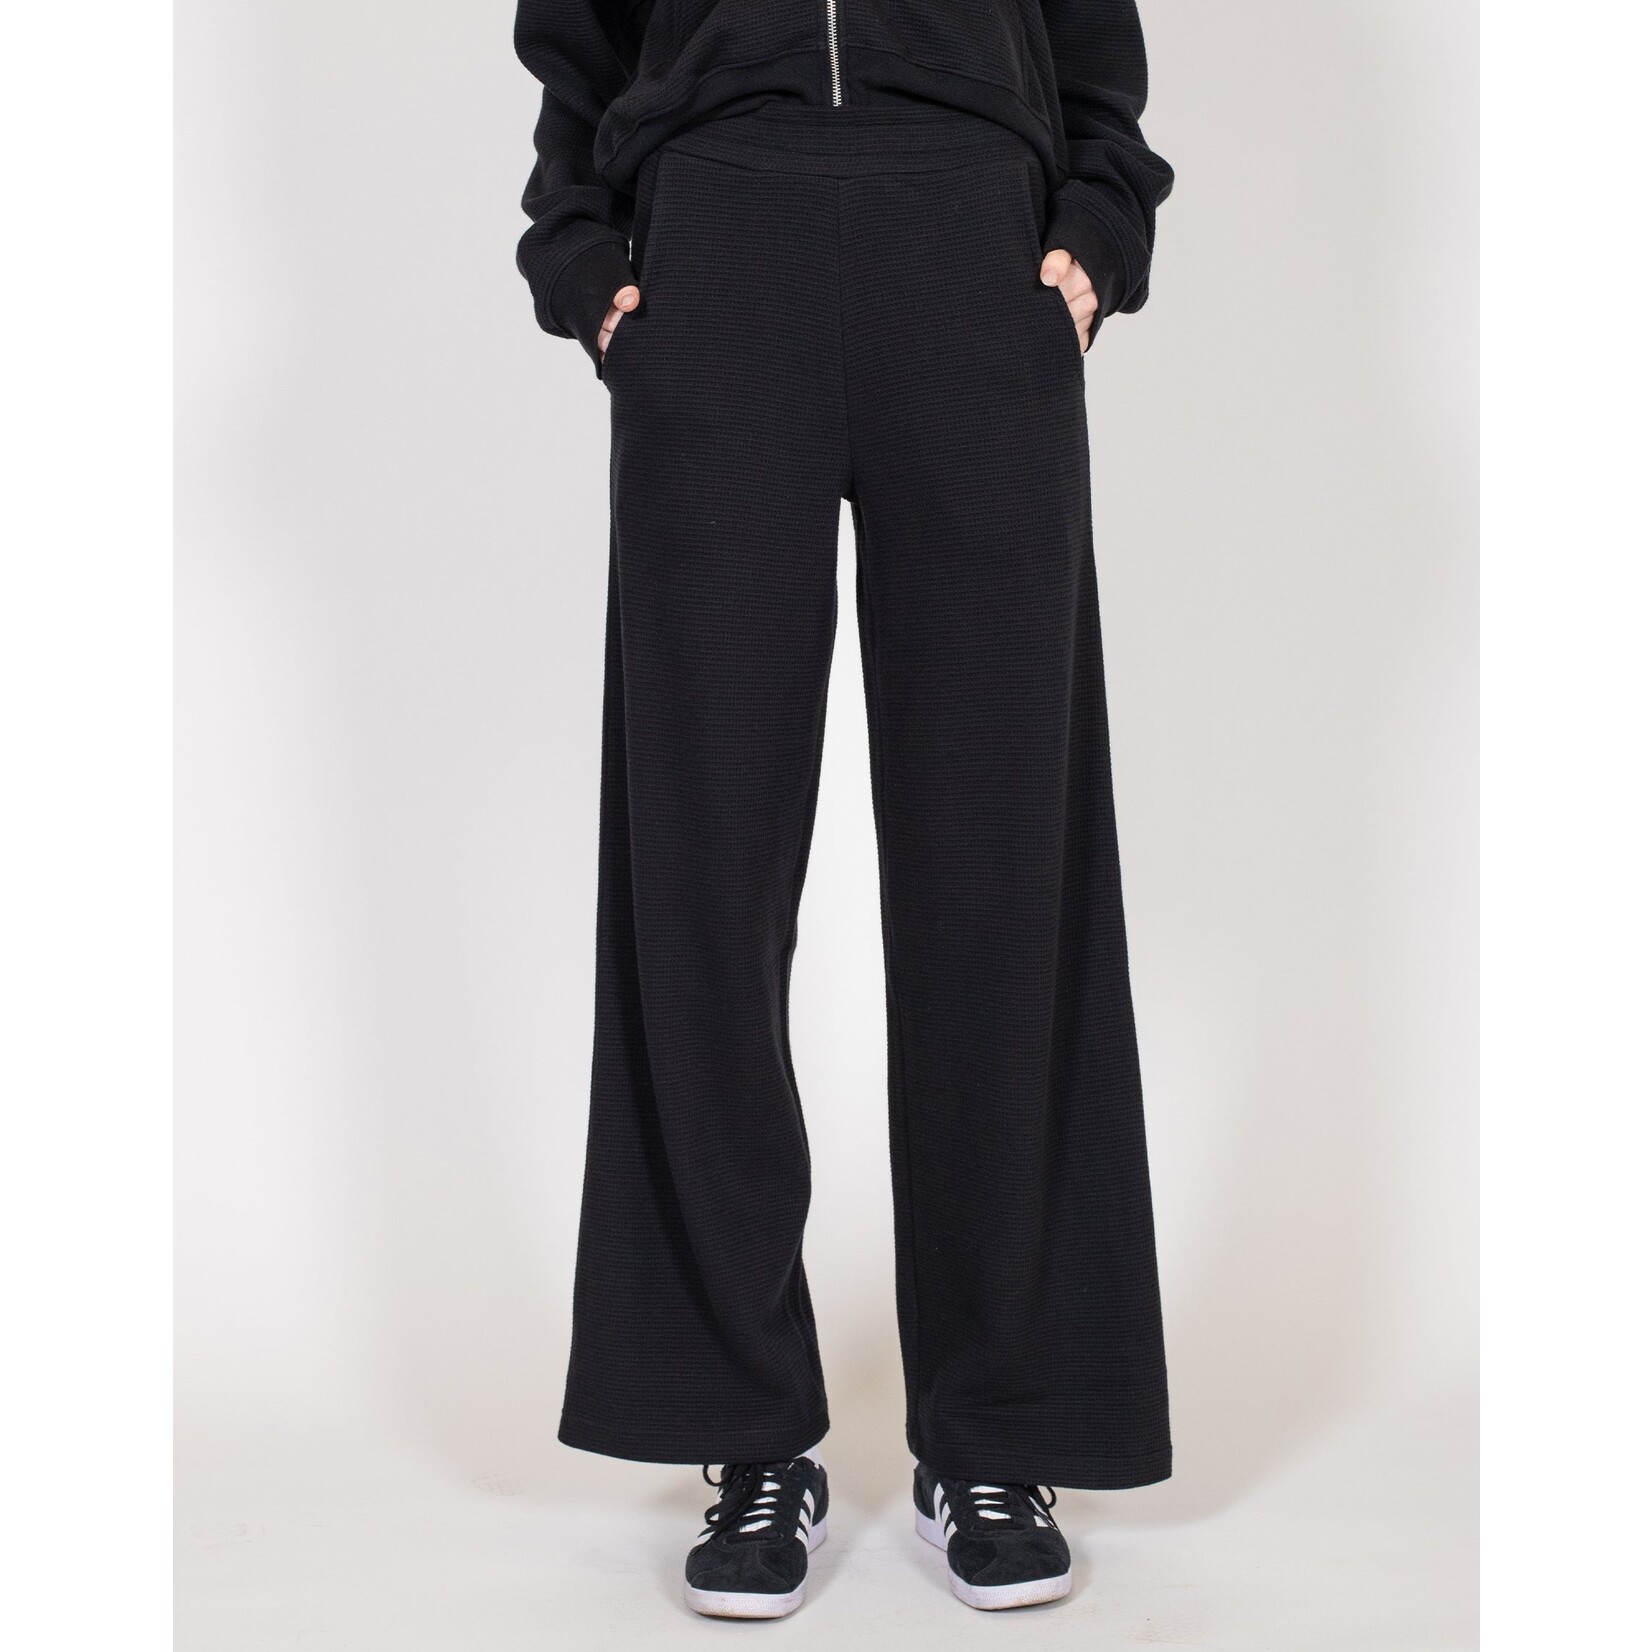 BRUNETTE THE LABEL WAFFLE KNIT PANT